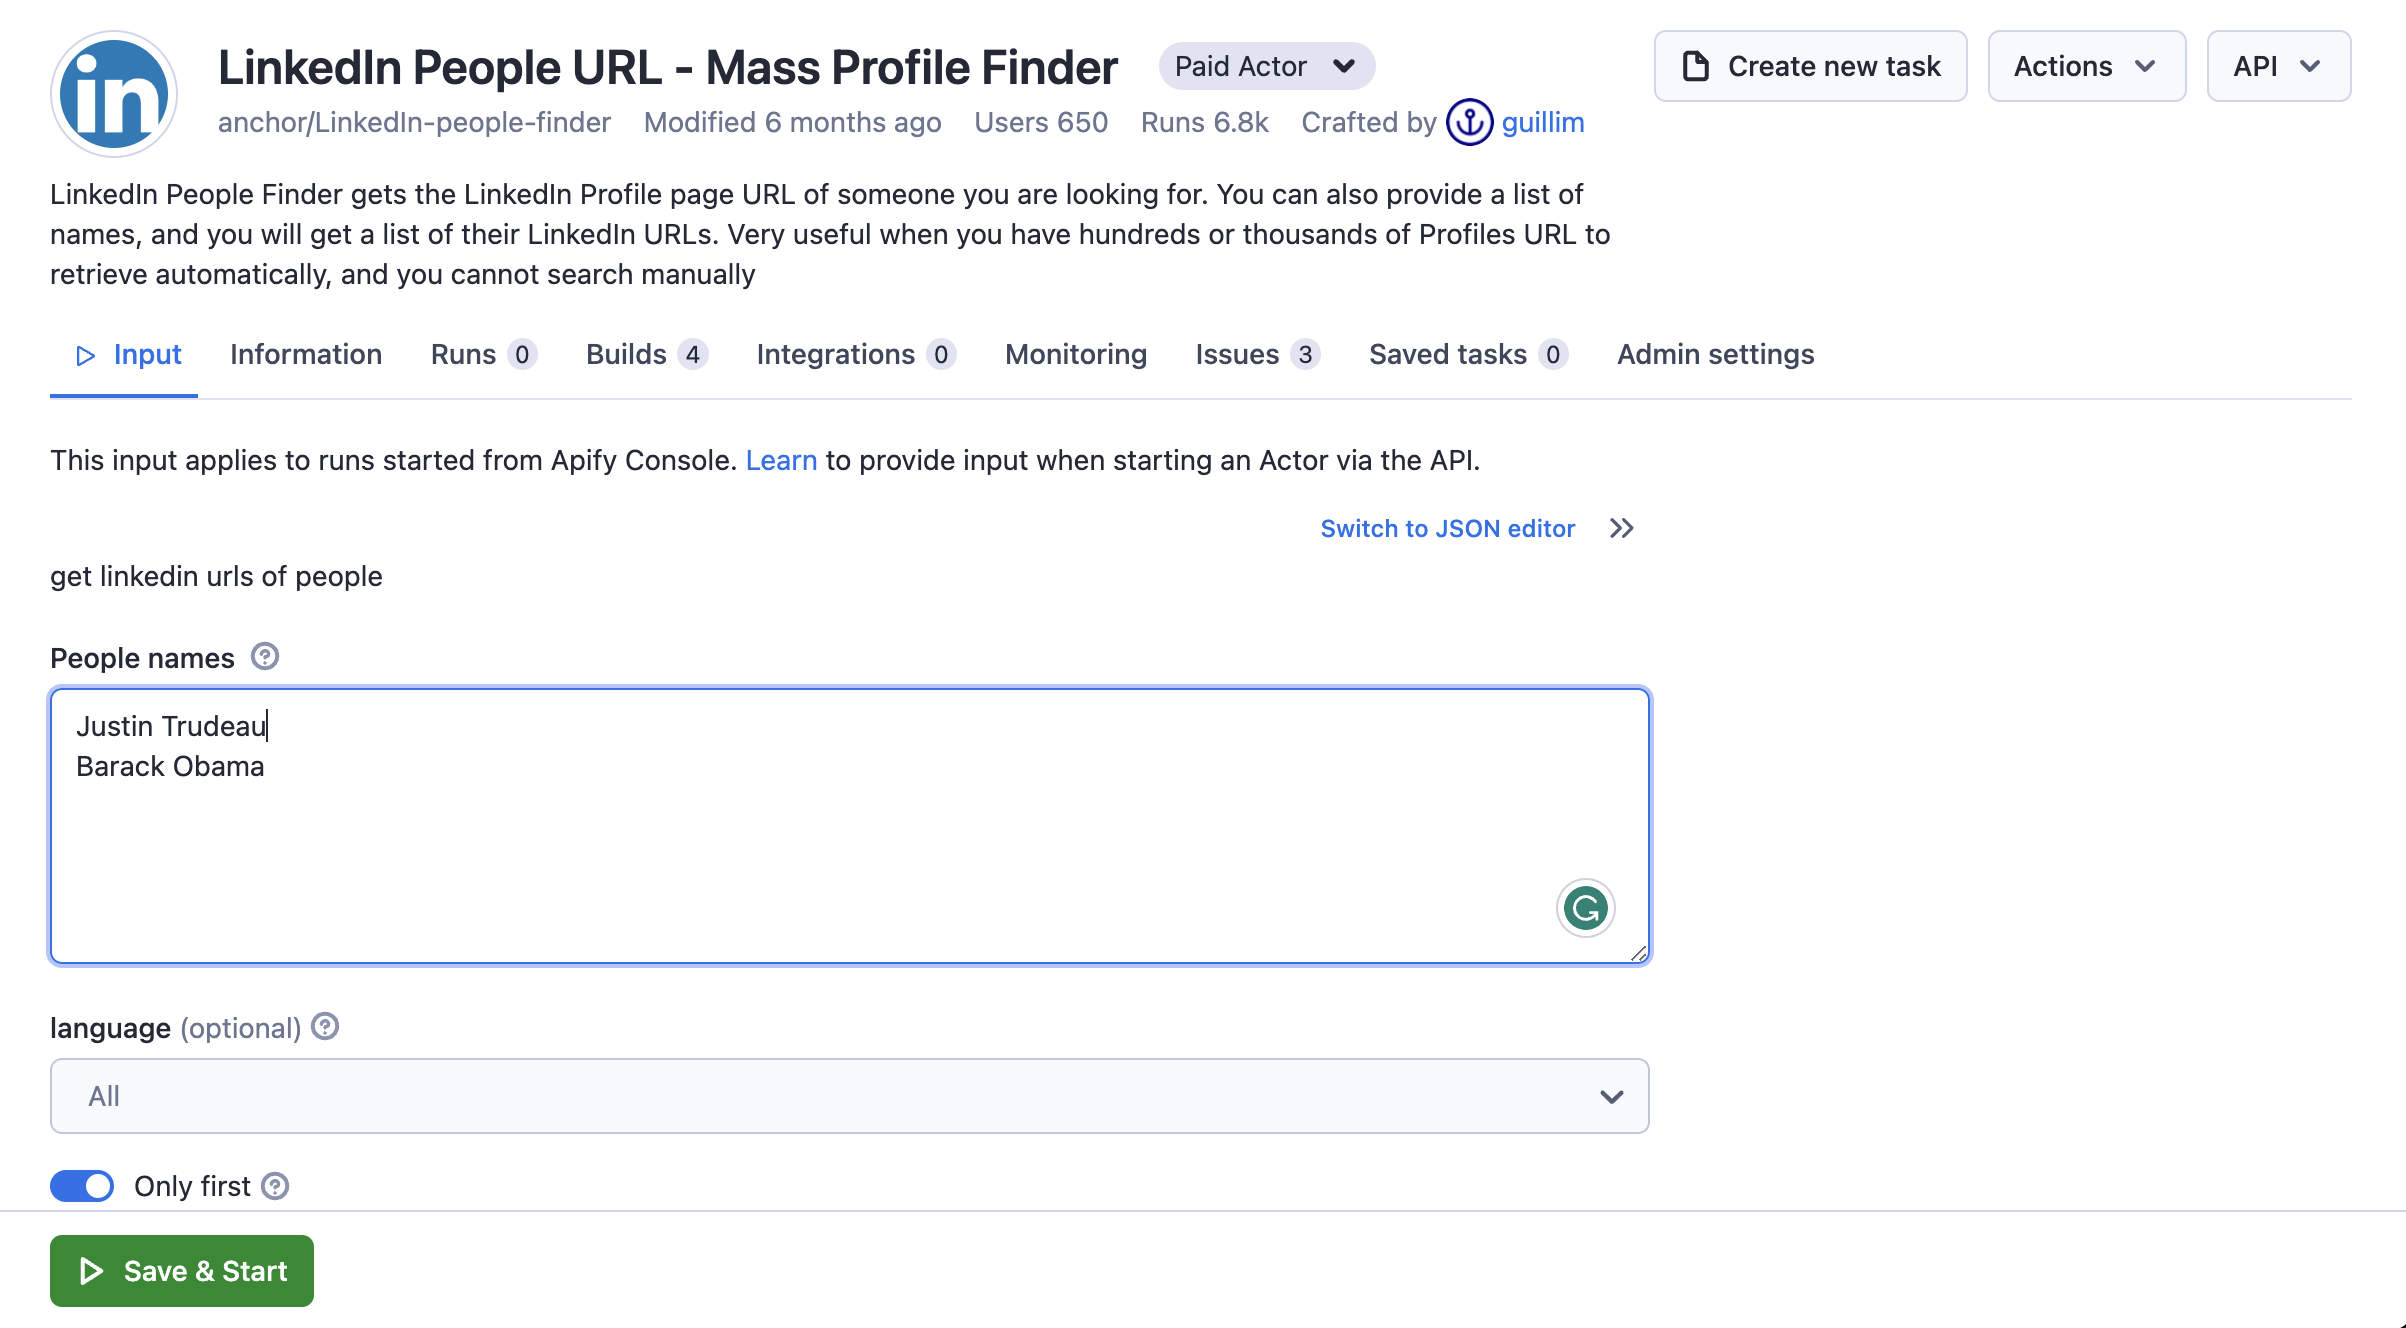 The input fields for LinkedIn People Finder.